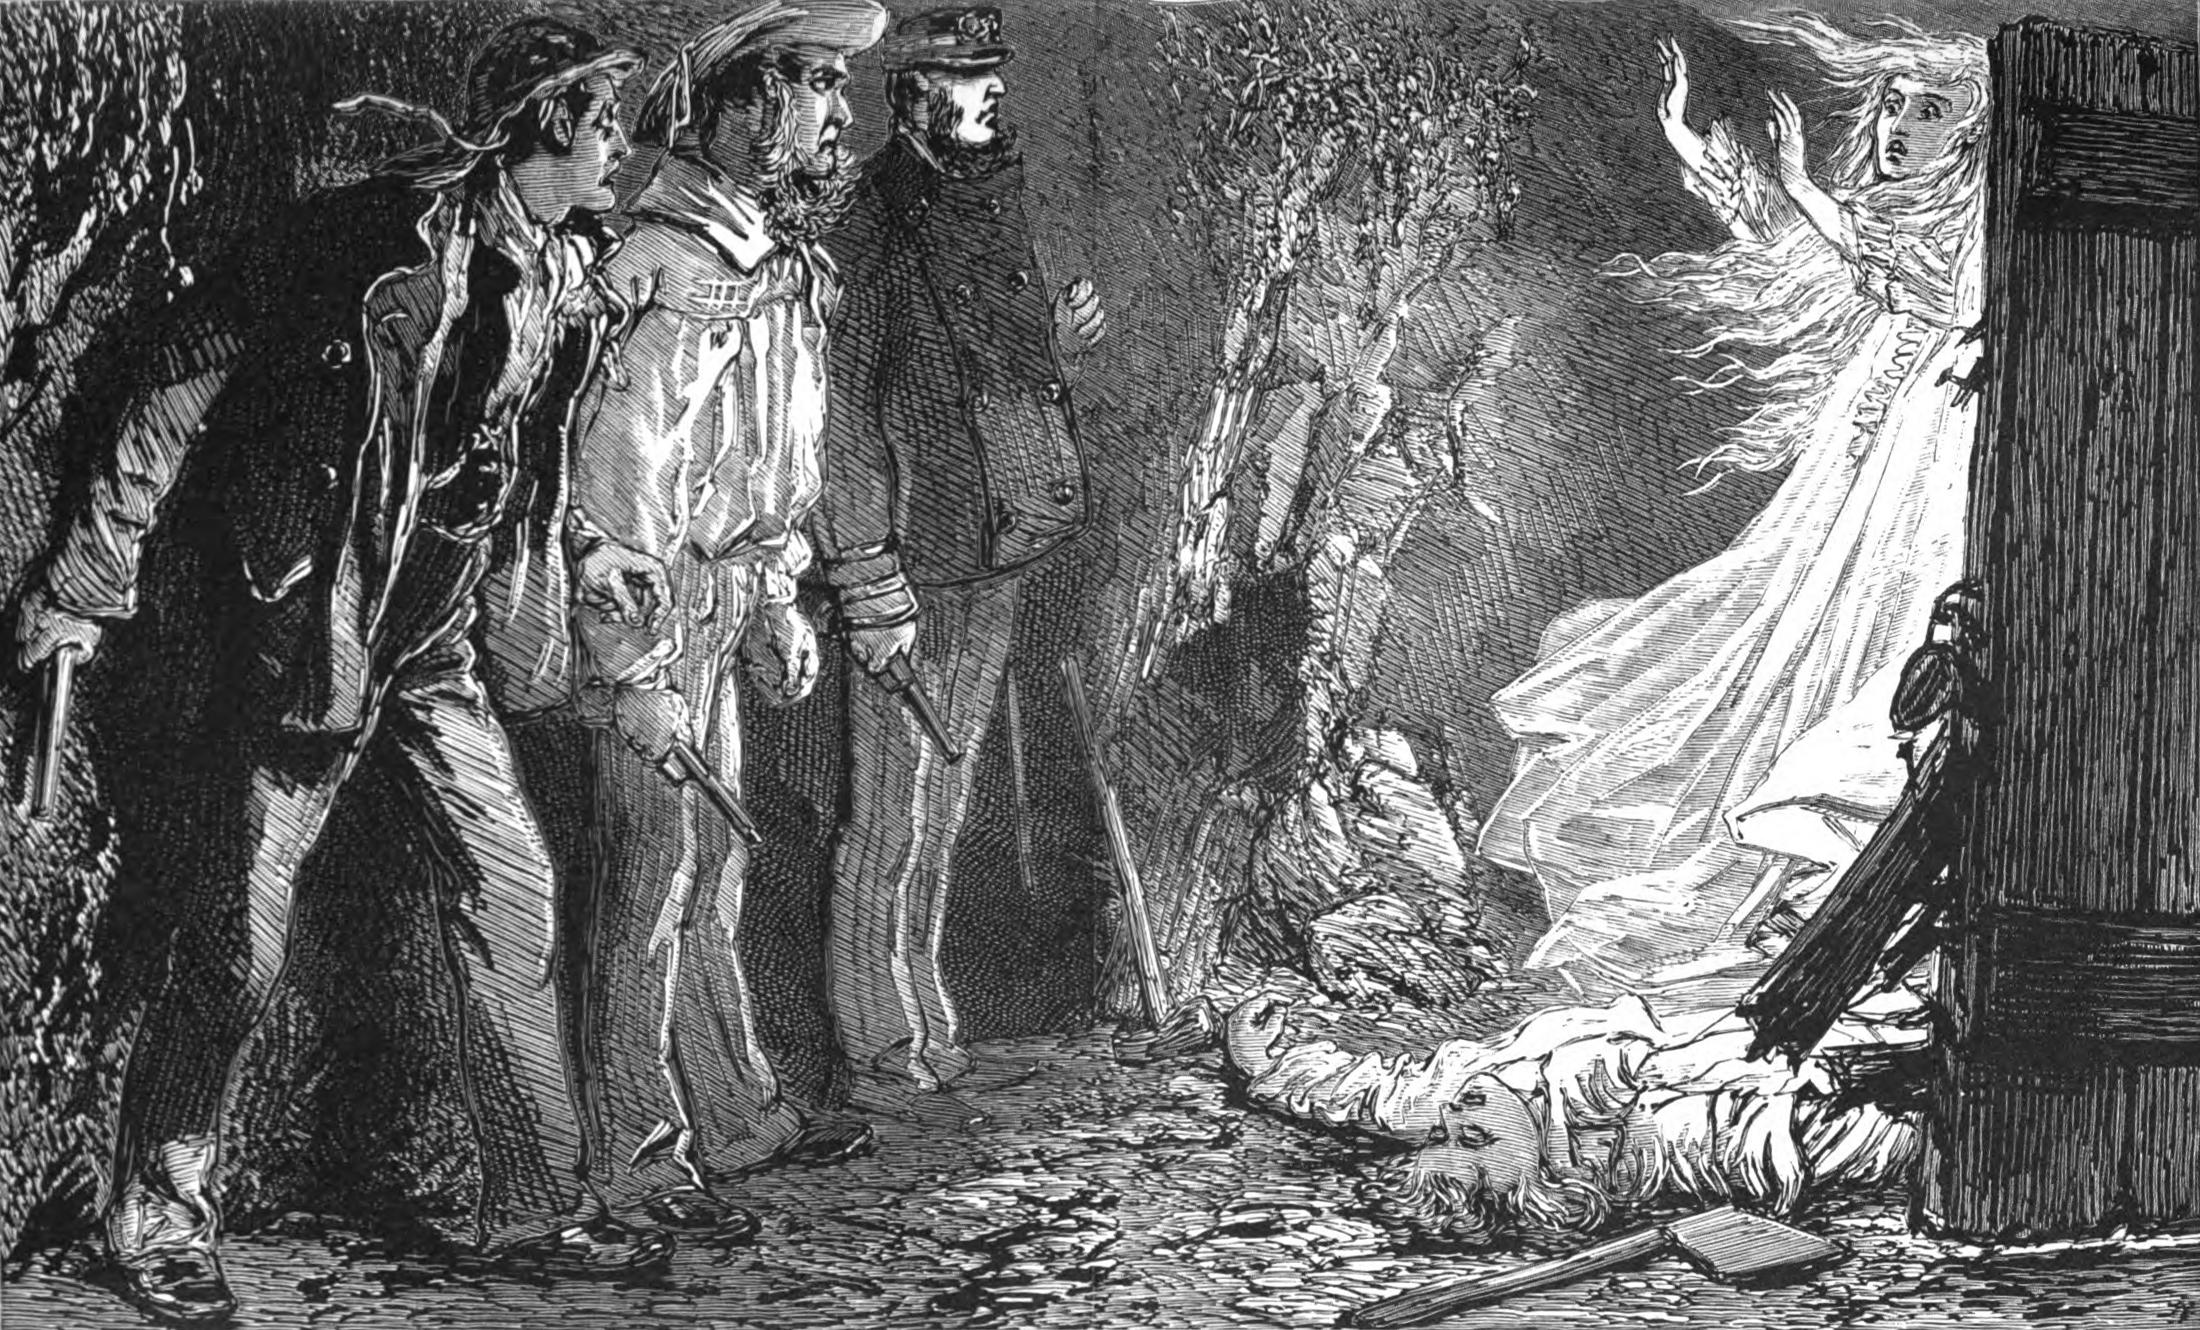 Image Description: Tom, Wilson, and Mr. Thomson stand together facing the cellar door. All three hold pistols. From behind the cellar door emerges the ghostly figure of a terrified woman. She holds her hands up in supplication. Below her lies the body of a dead young man. An axe sits on the ground near his head and the cellar door obscures the lower half of his body. End Description.